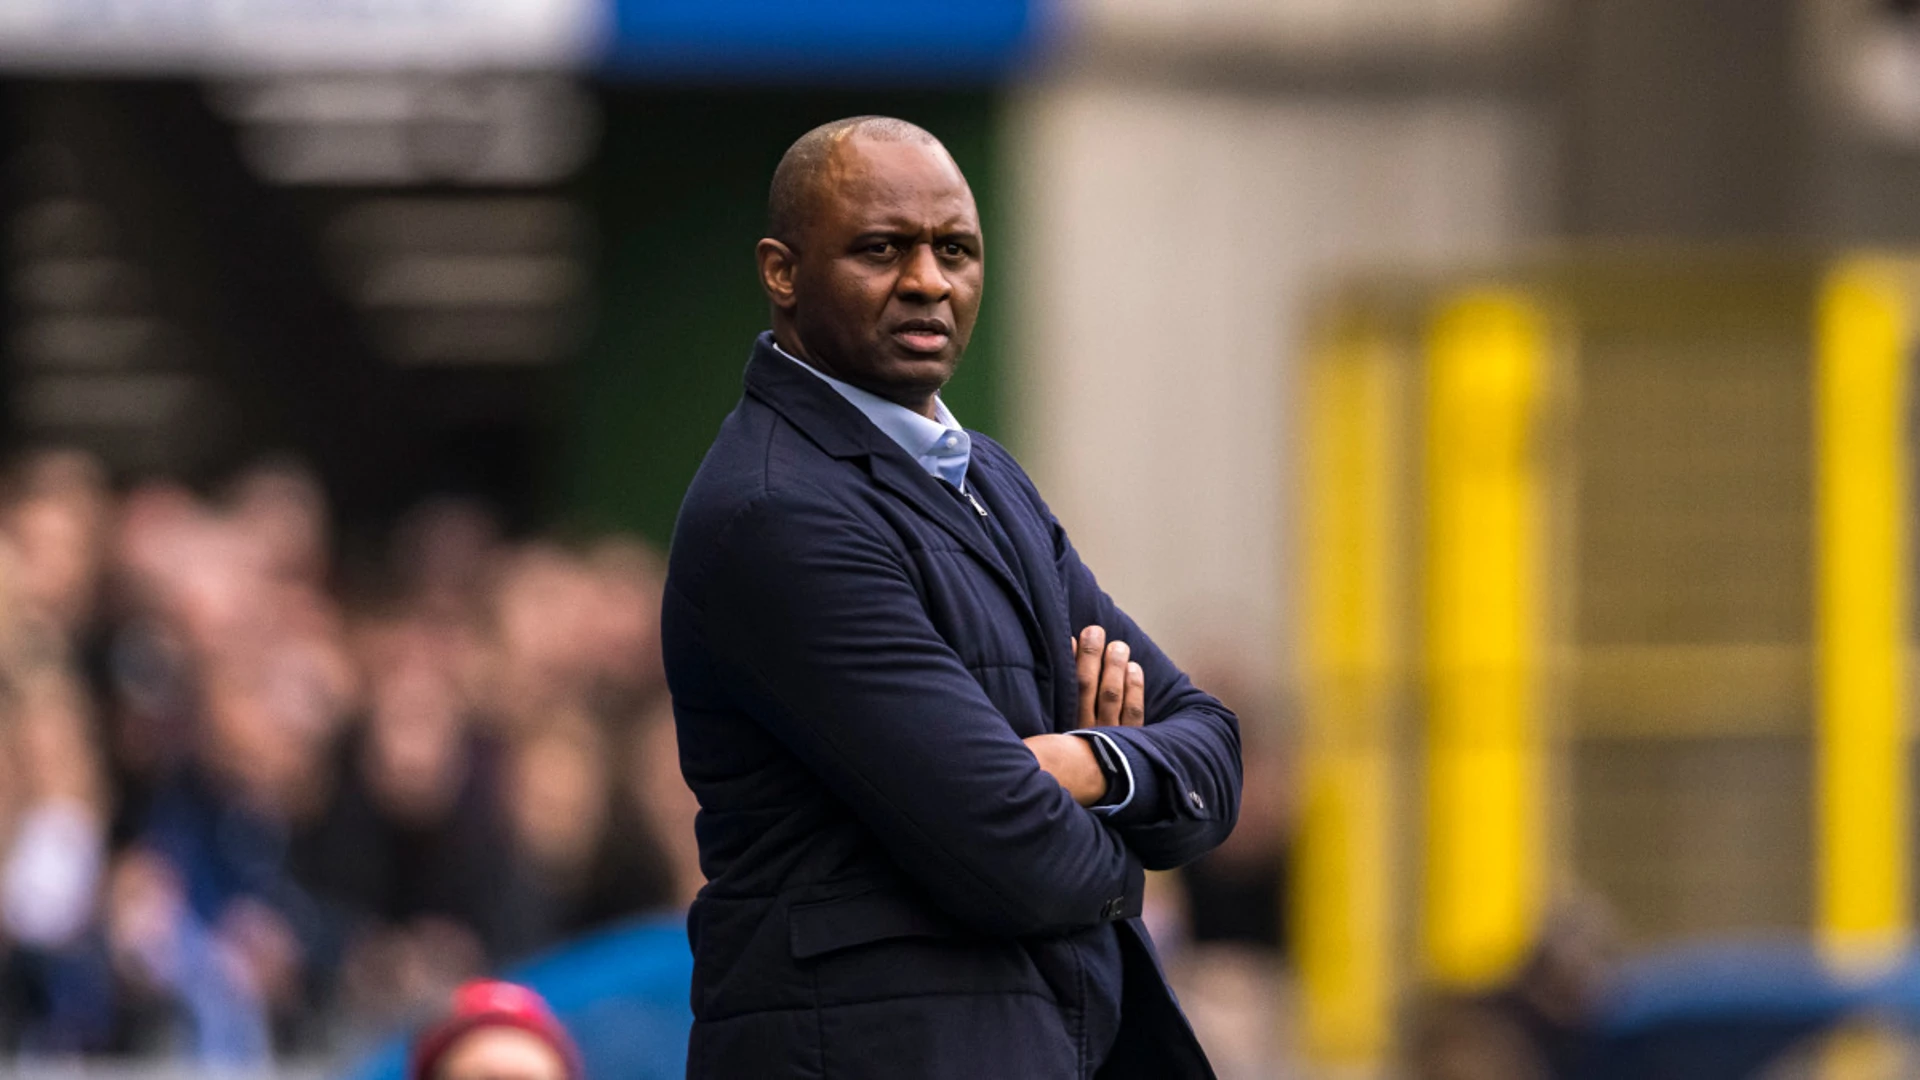 Vieira quits as Strasbourg coach, linked to vacant USA manager post